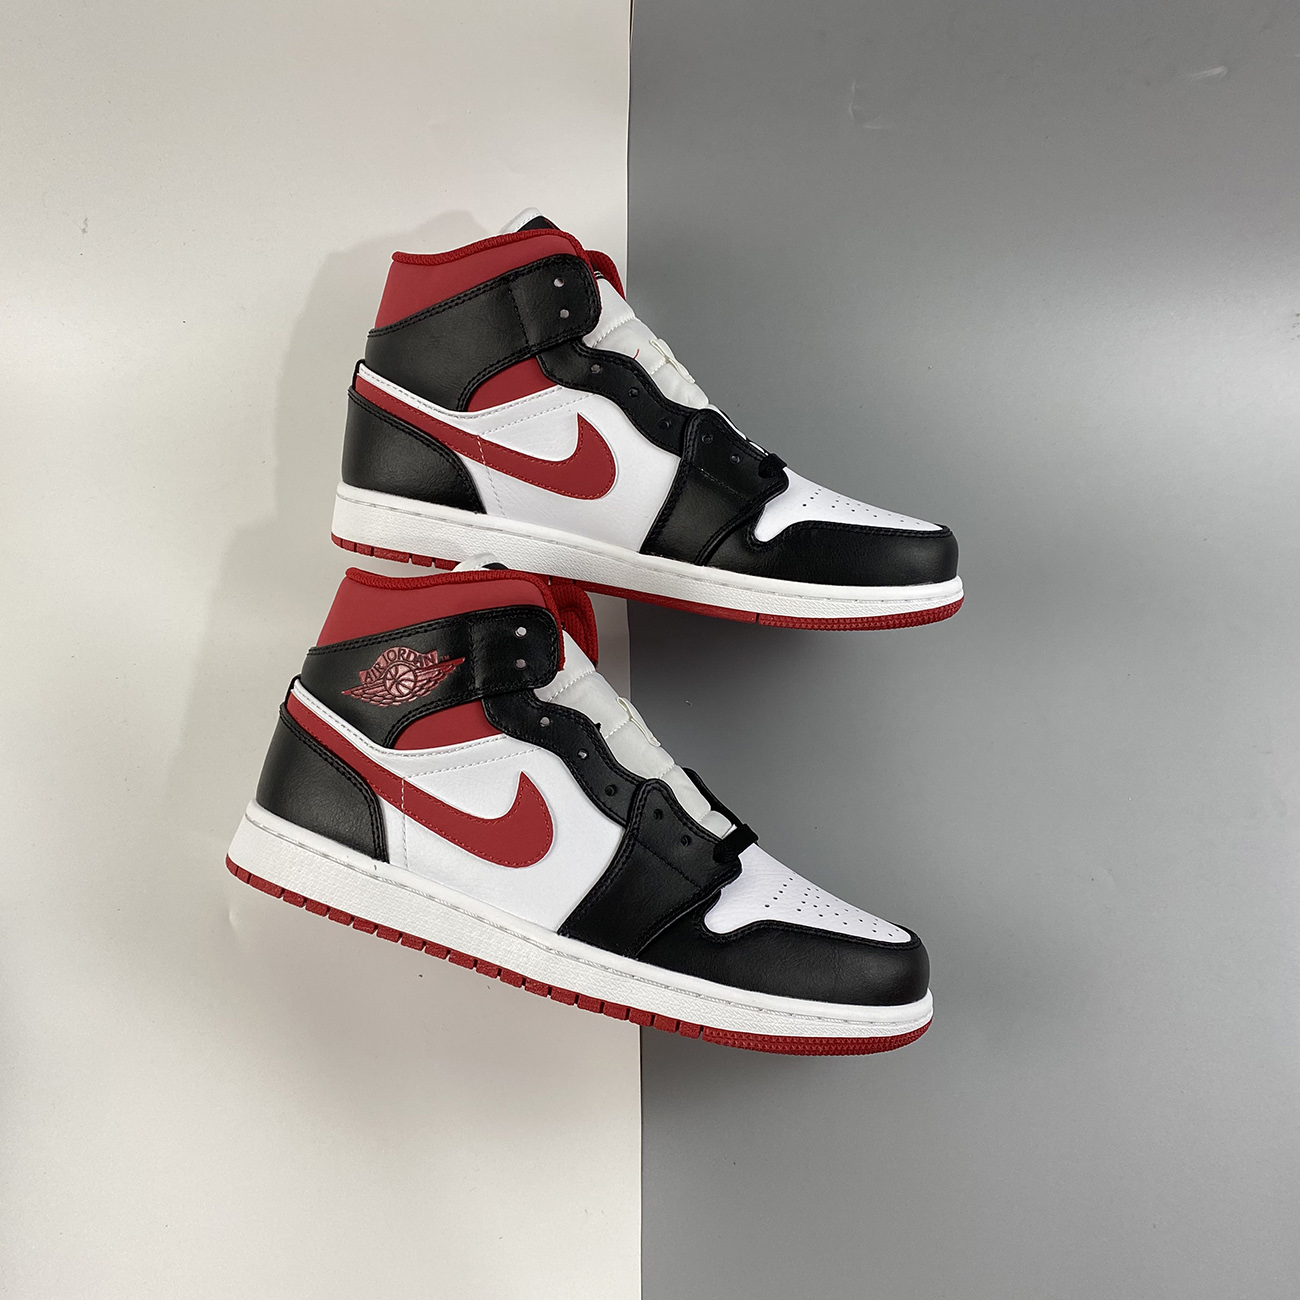 Air Jordan 1 Mid “Metallic Red” White/Gym Red-Black For Sale – The Sole ...